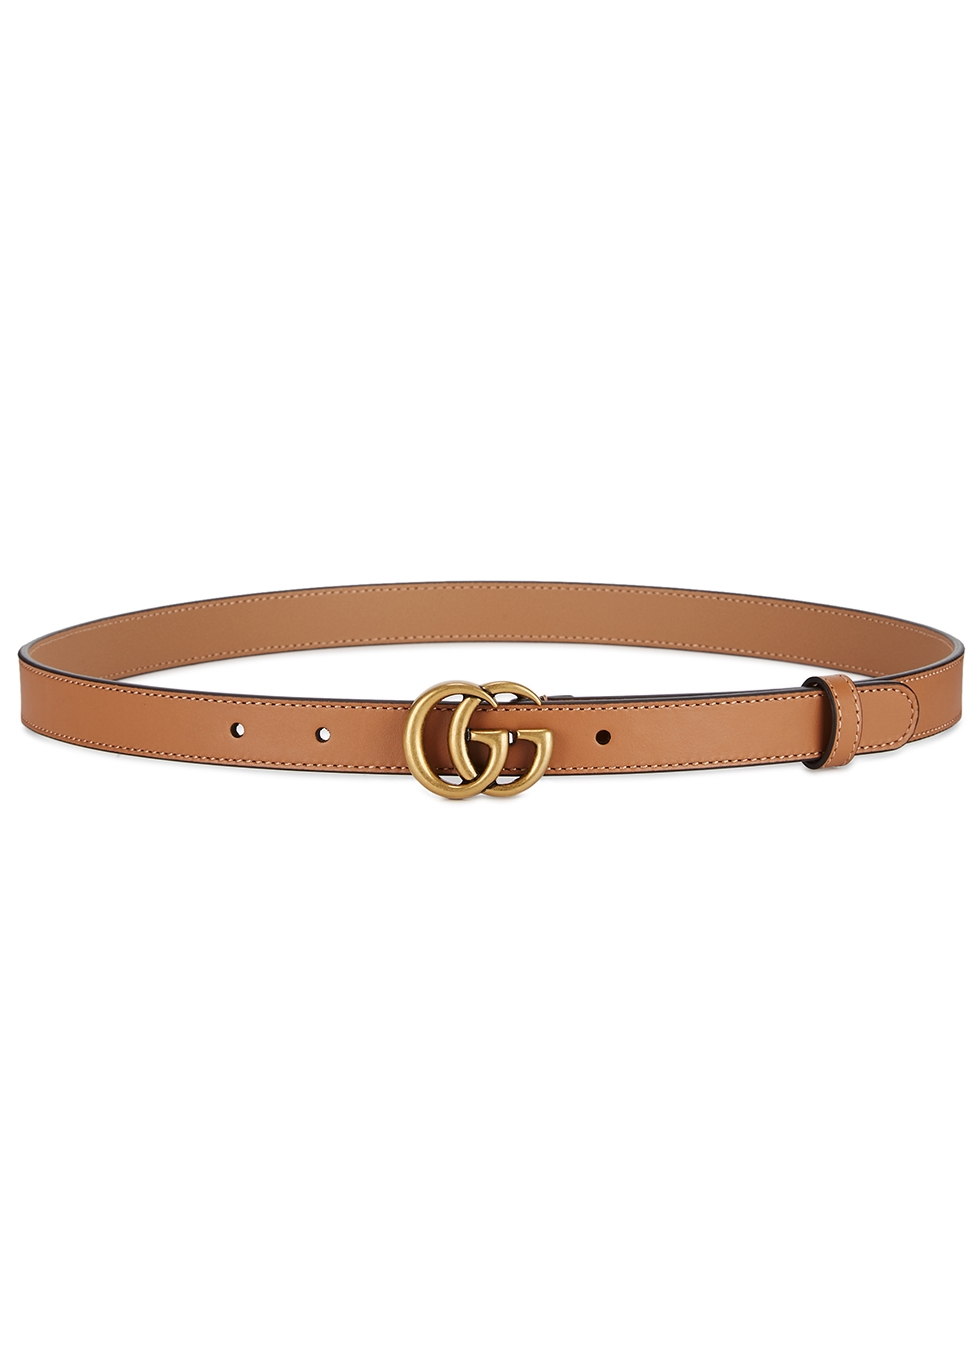 Gucci GG light brown leather belt 